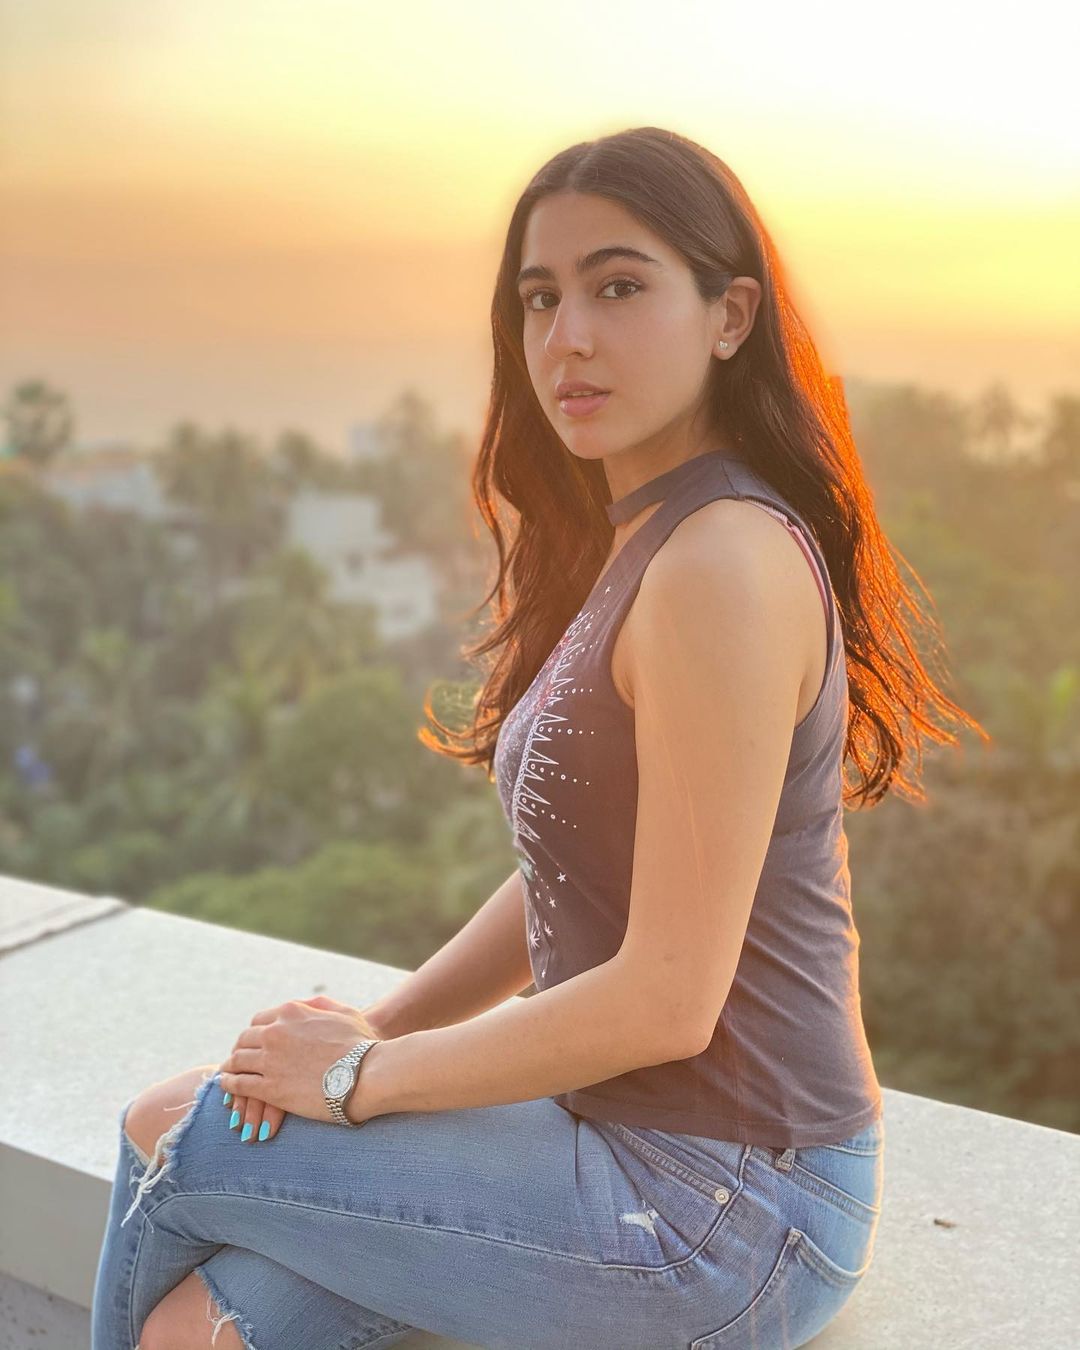 Some Amazing Facts about the famous B-town Actress, Sara Ali Khan